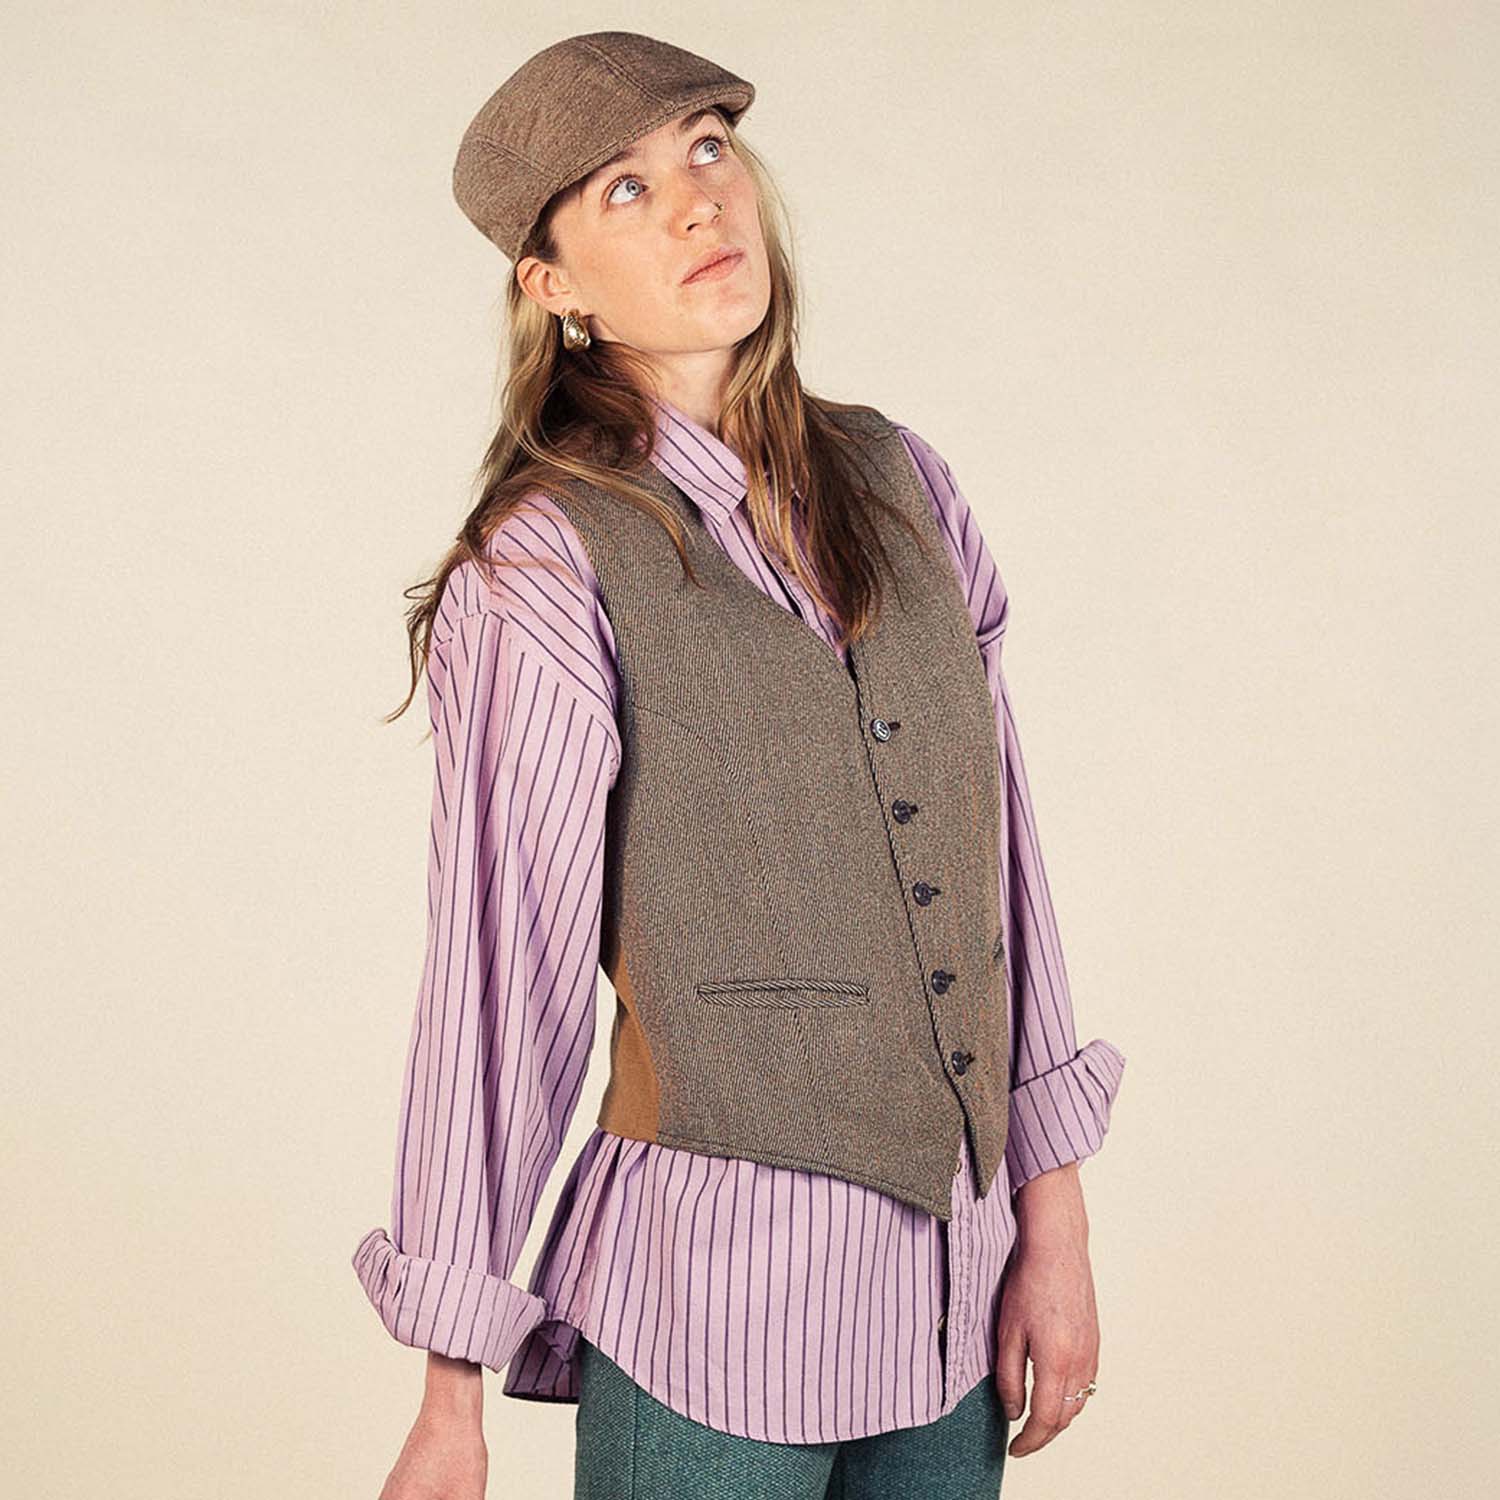 2023 Classic Vintage Waistcoats for Women: A Timeless Collection